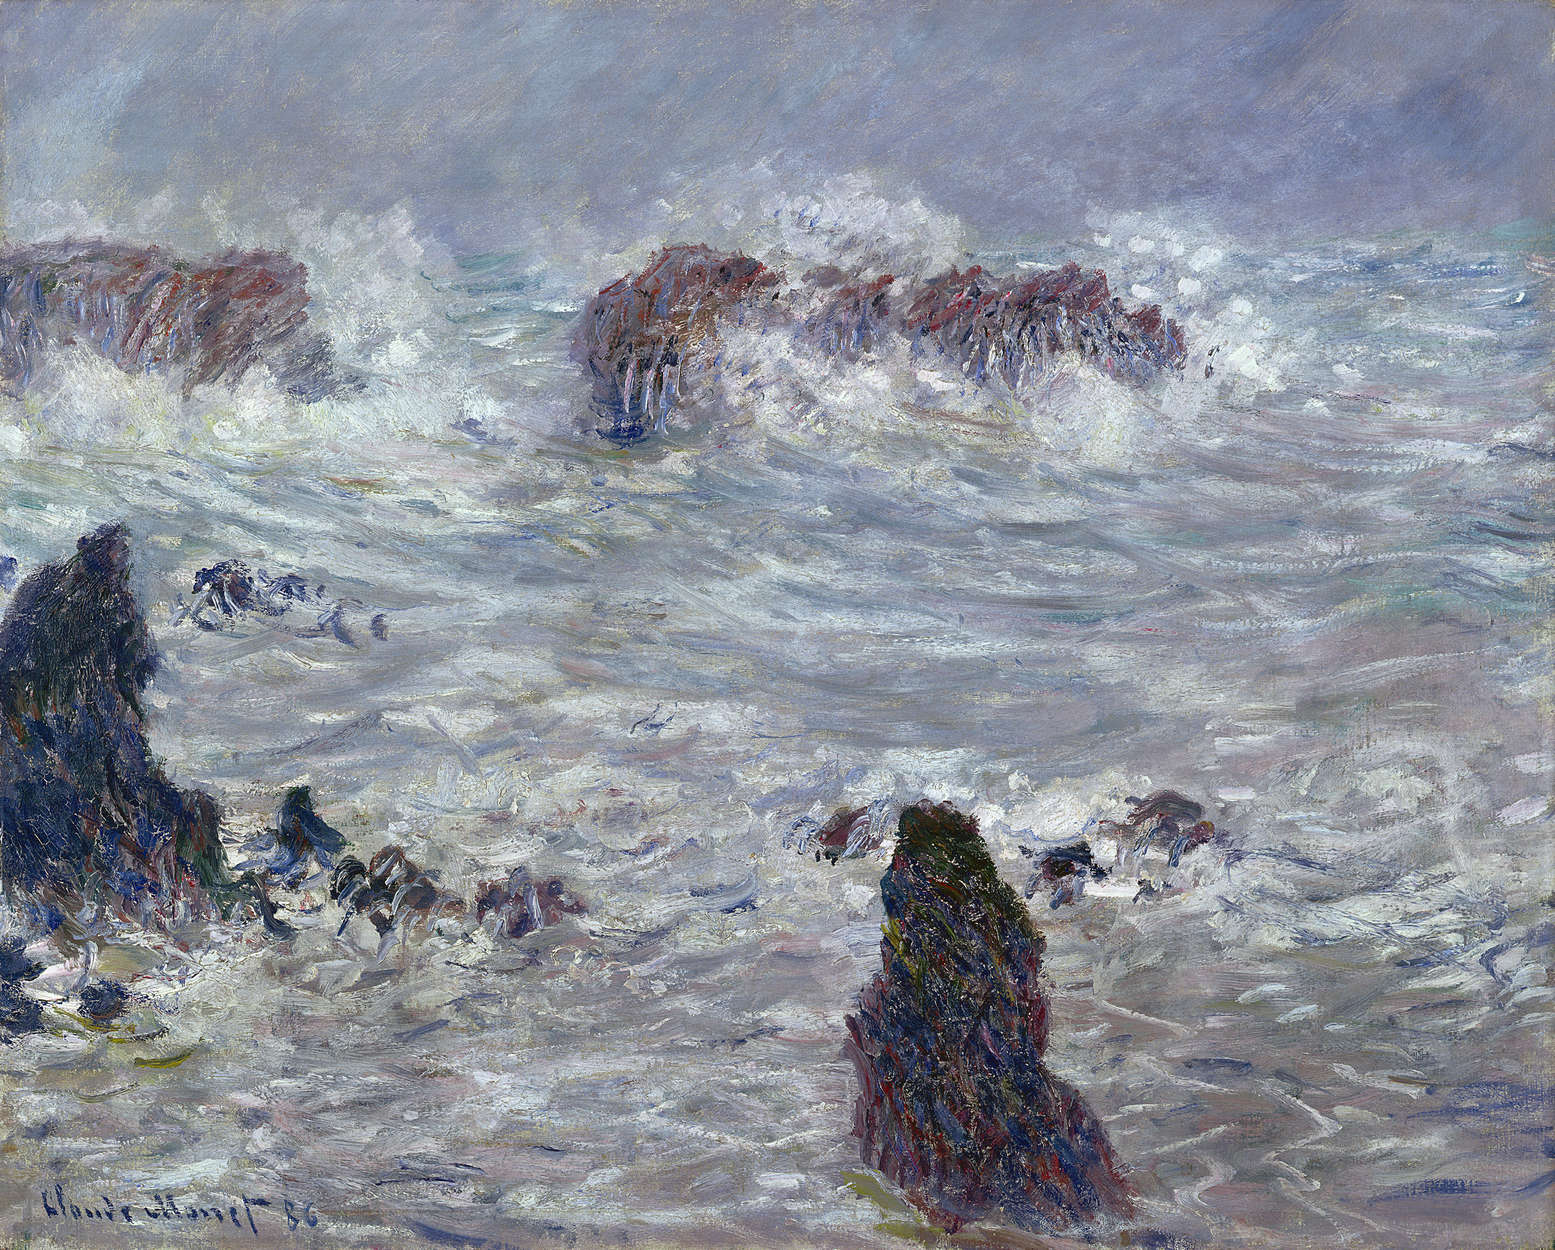             Photo wallpaper "Storm off the coast" by Claude Monet
        